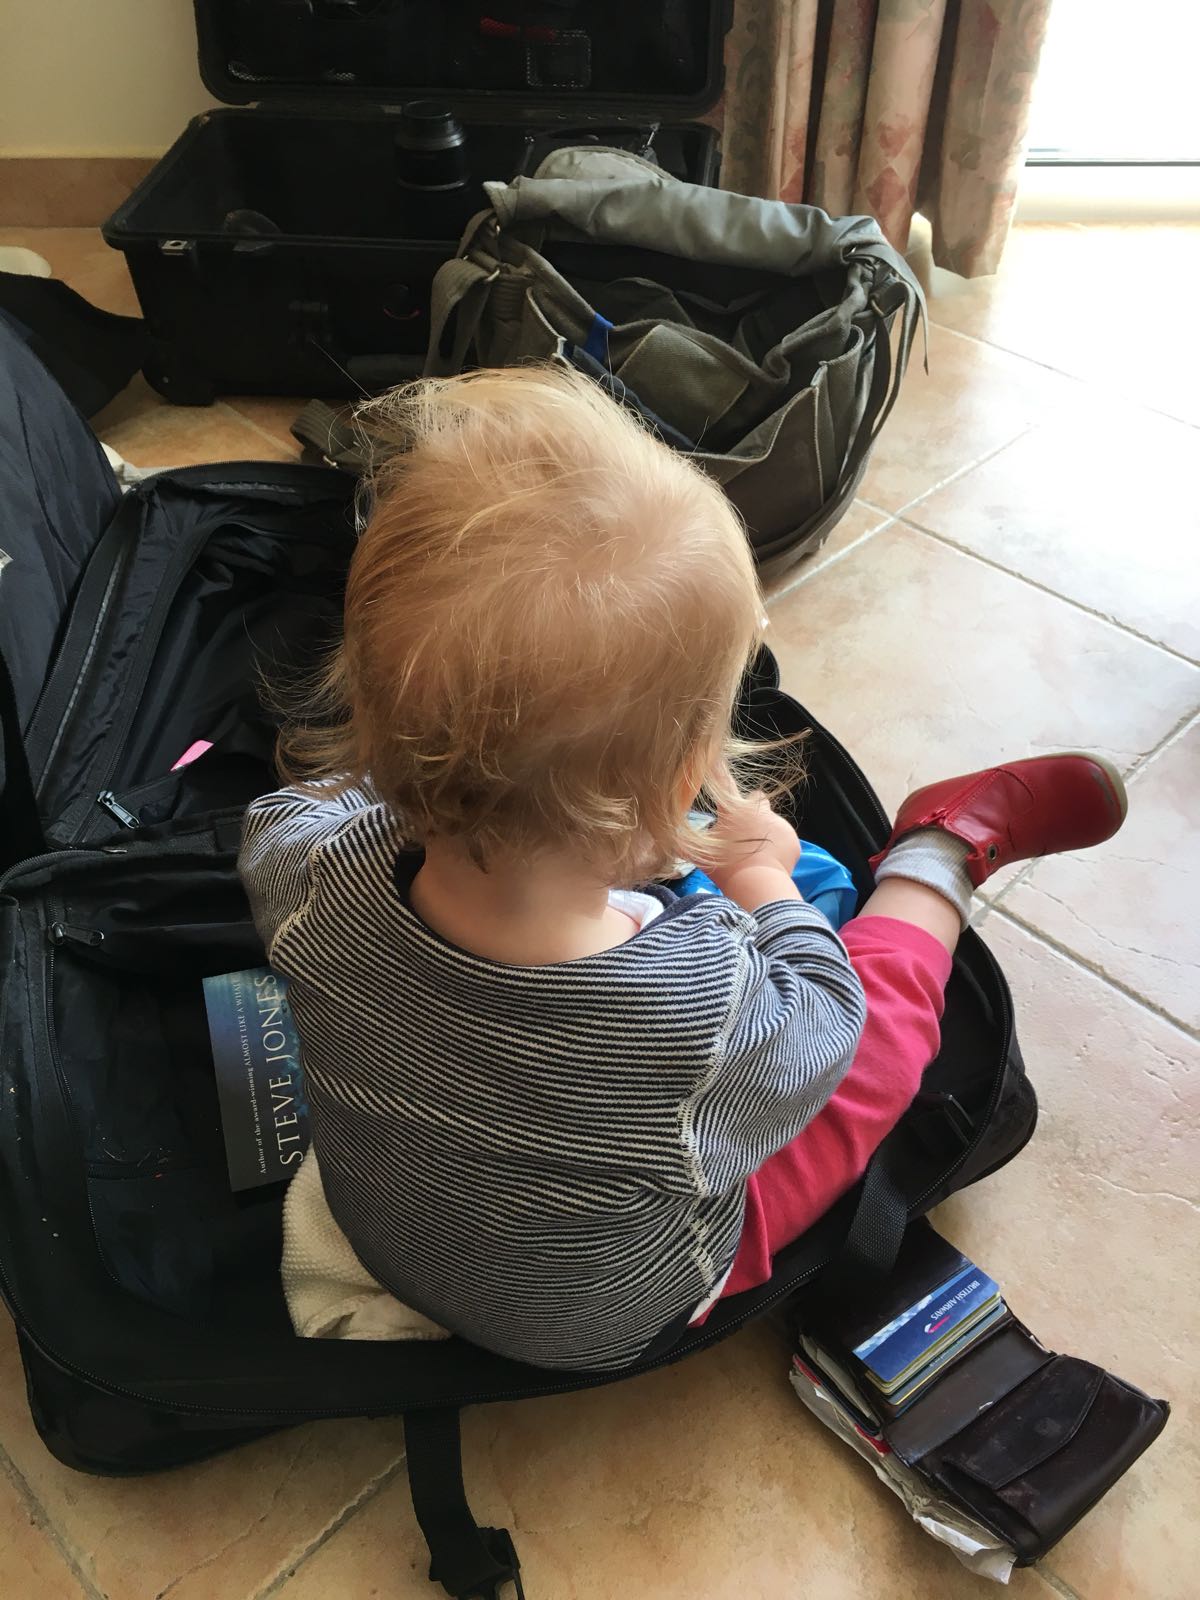 A toddler sits in an open suitcase, other bags on the floor around her.